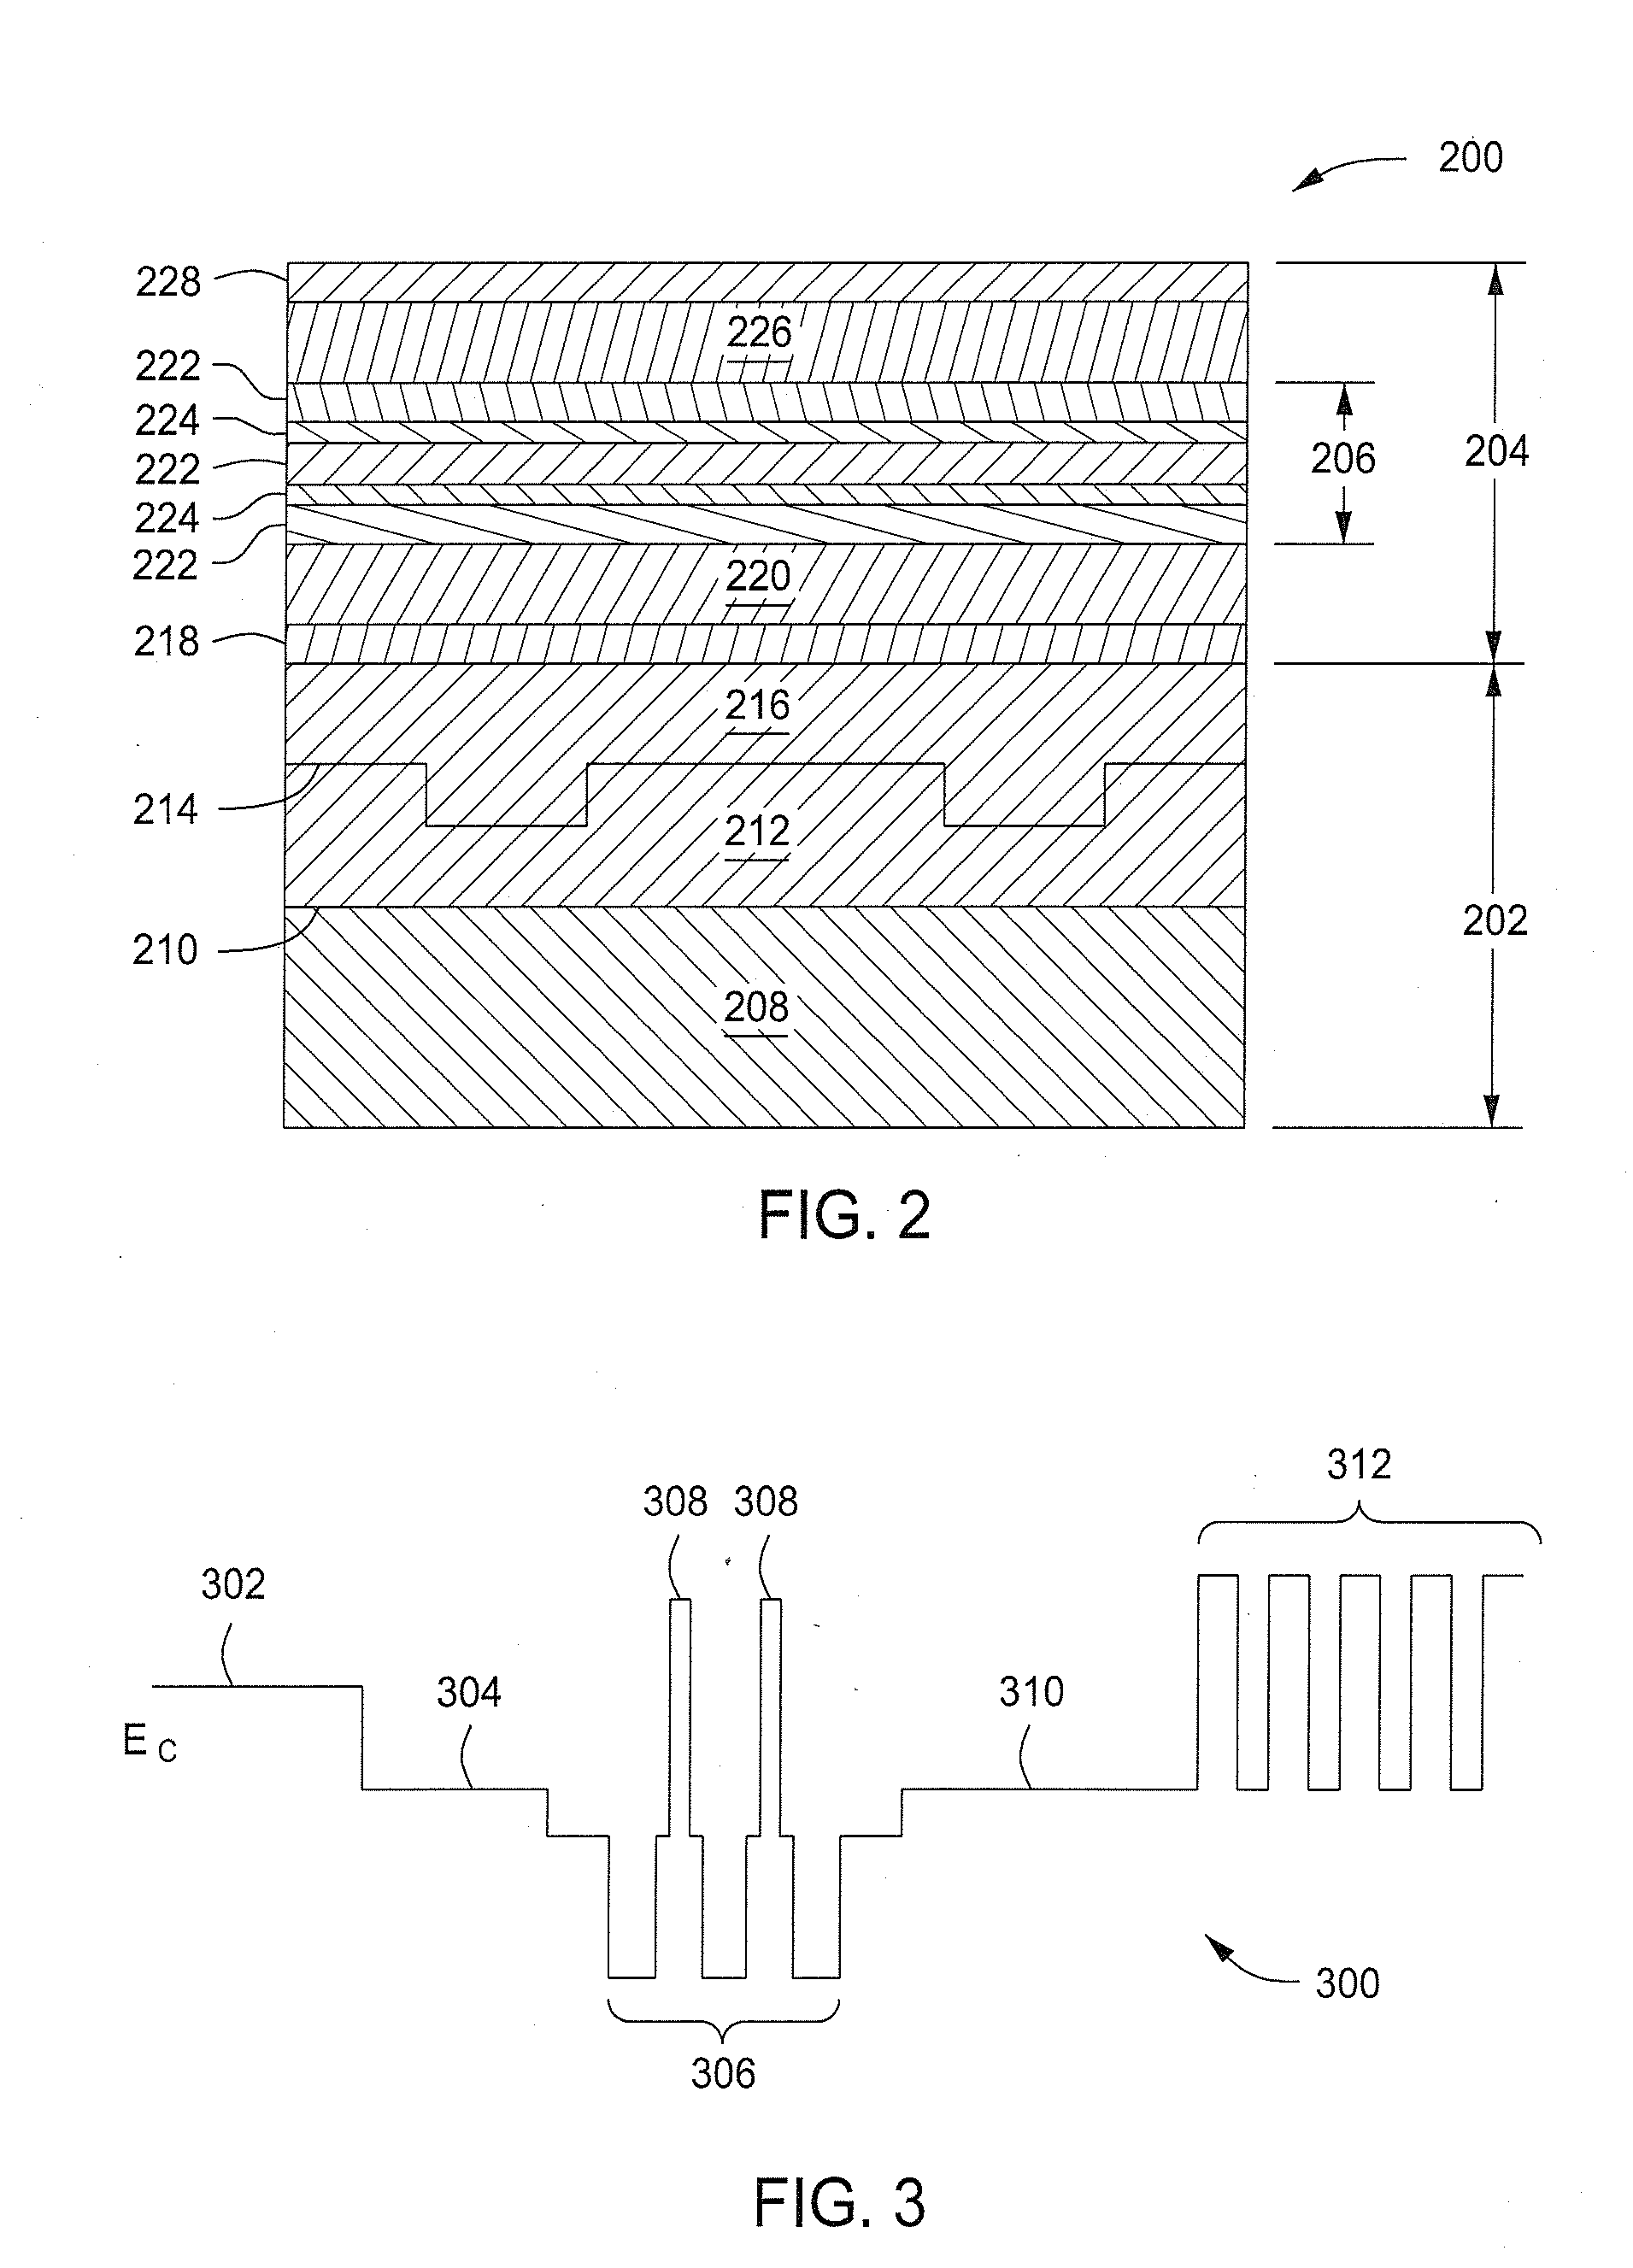 Method and apparatus for downhole spectroscopy